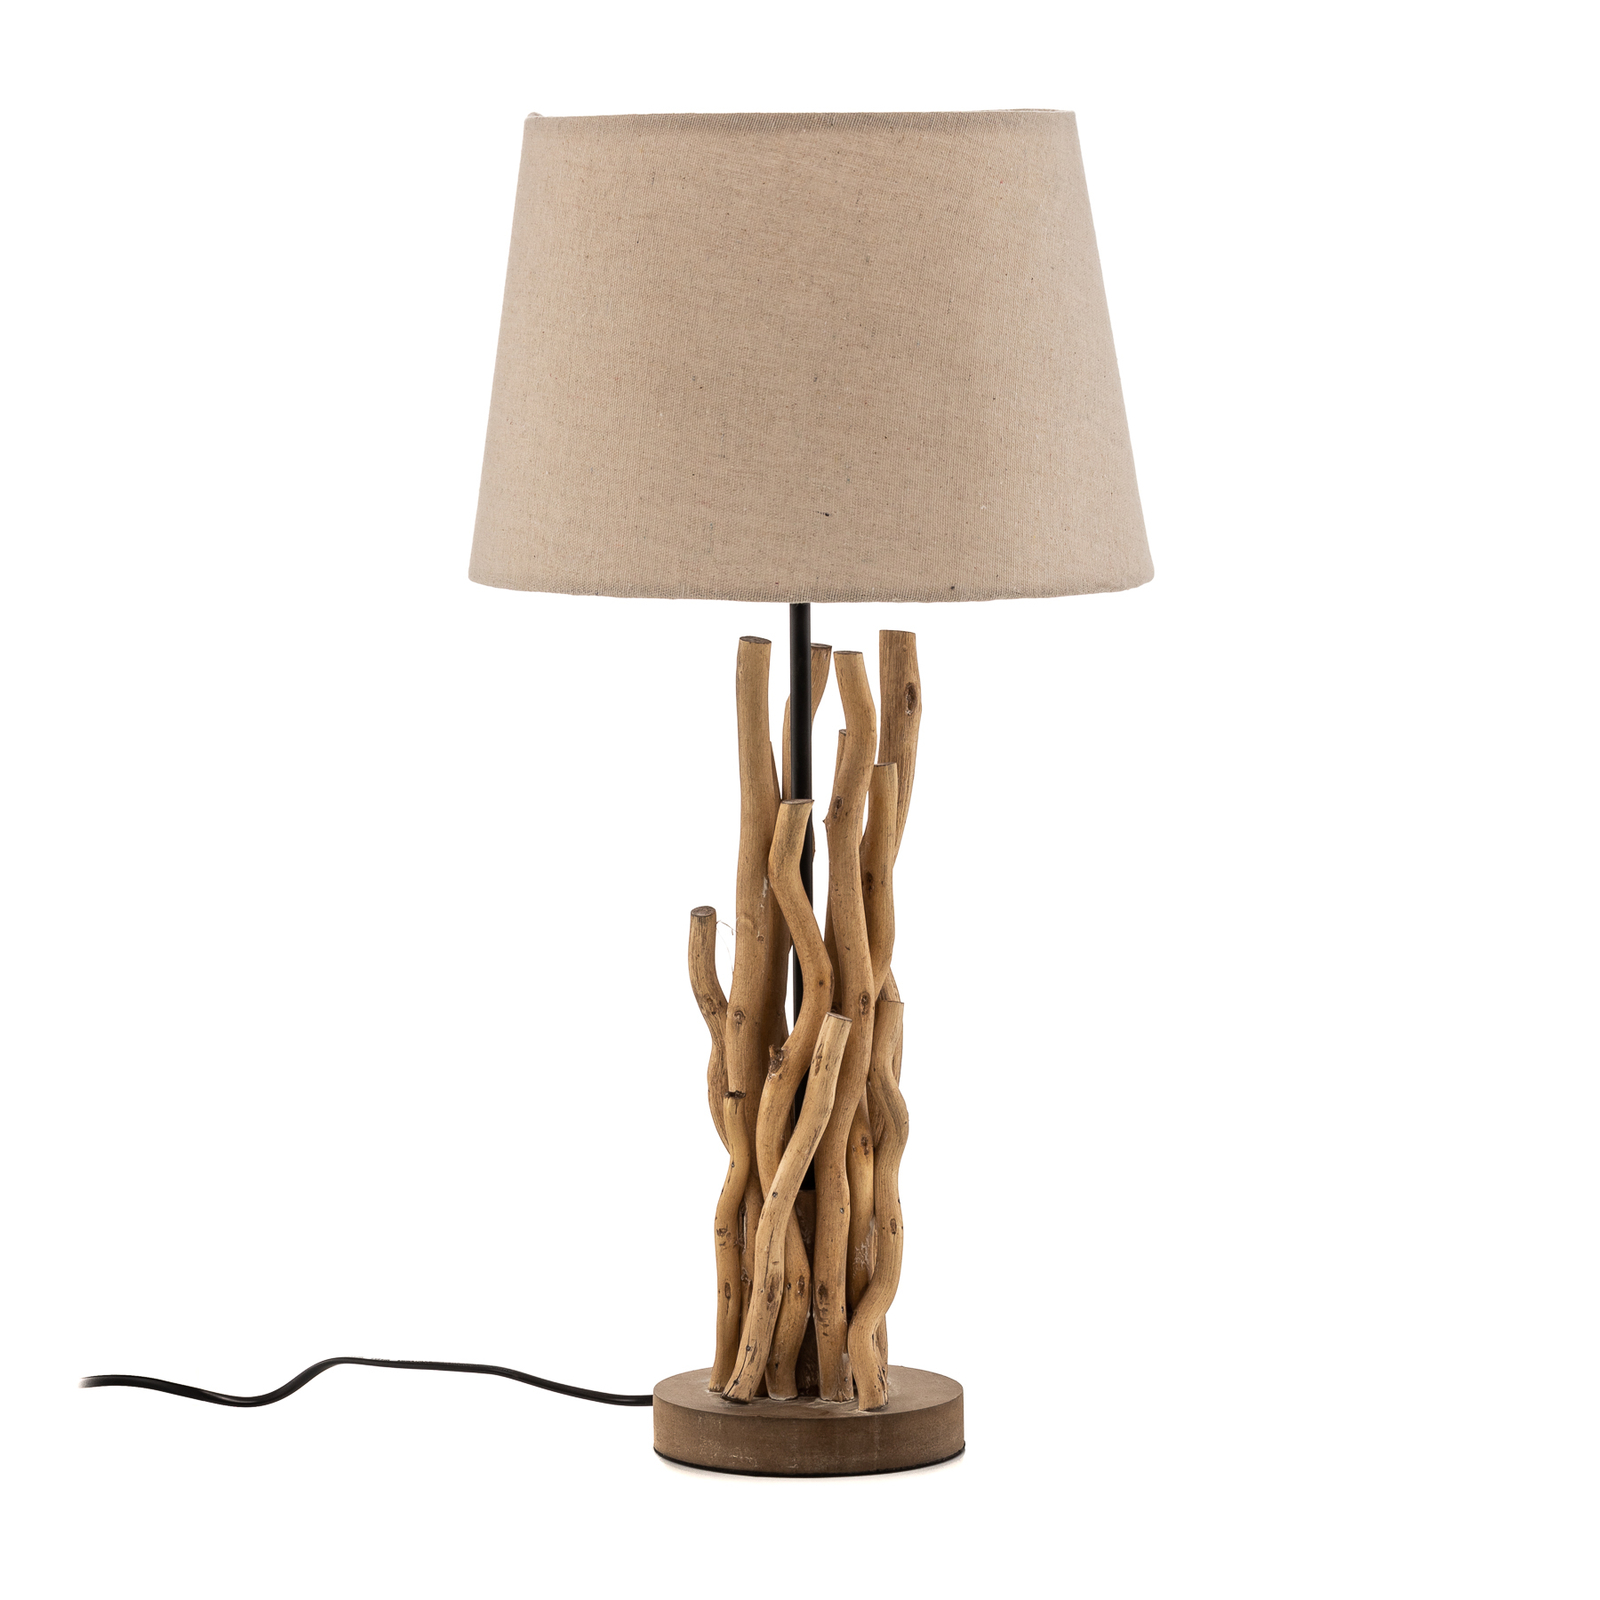 Agar table lamp, fabric lampshade and wood element